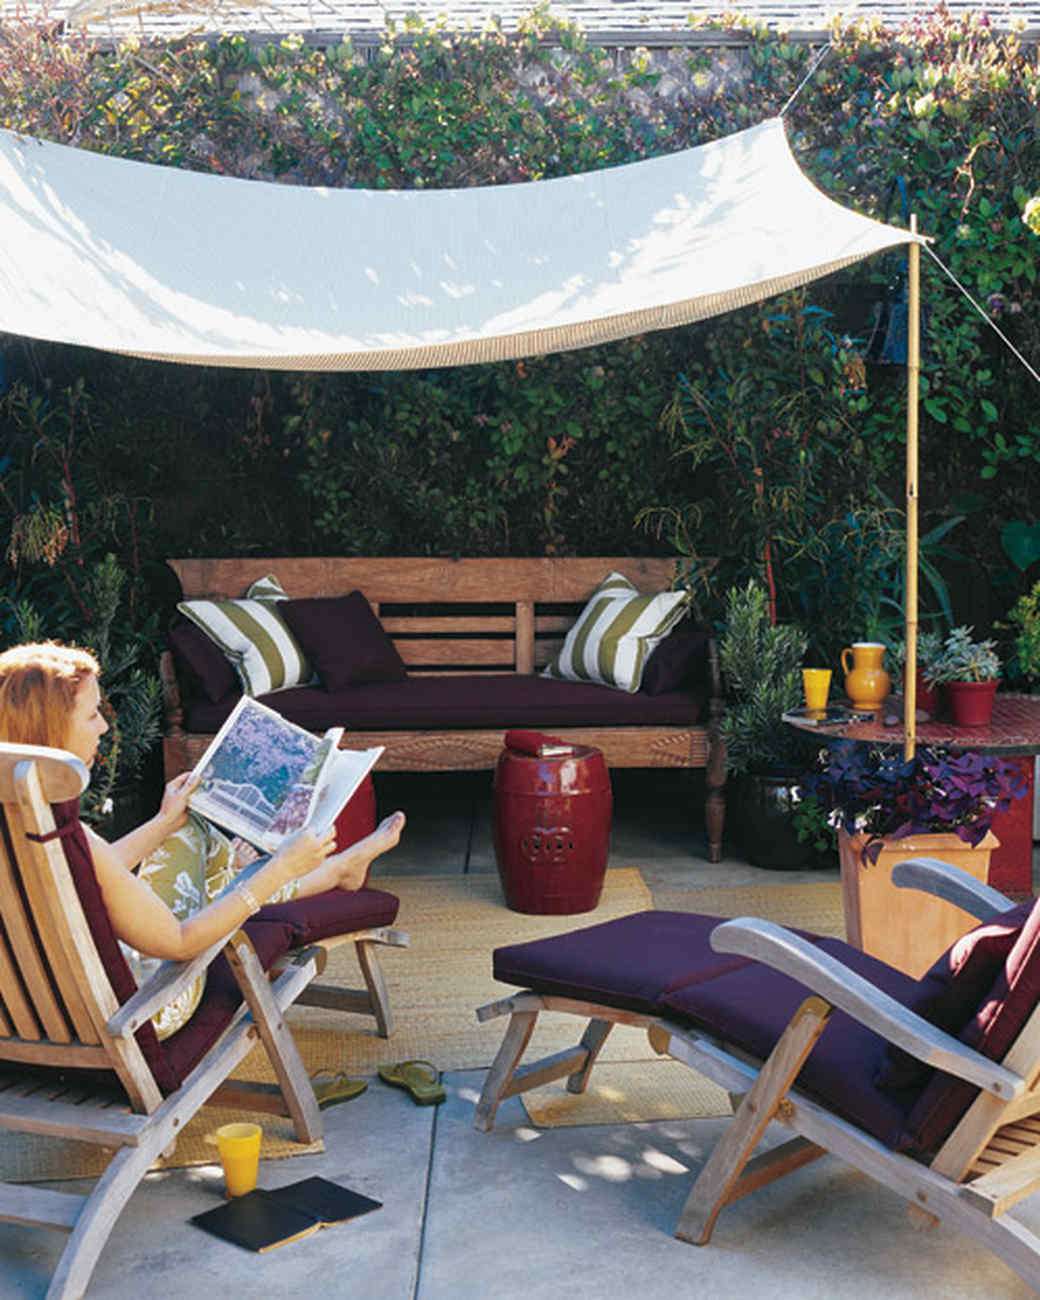 A Slice Of Shade Creating Canopies, How To Make A Temporary Outdoor Canopy